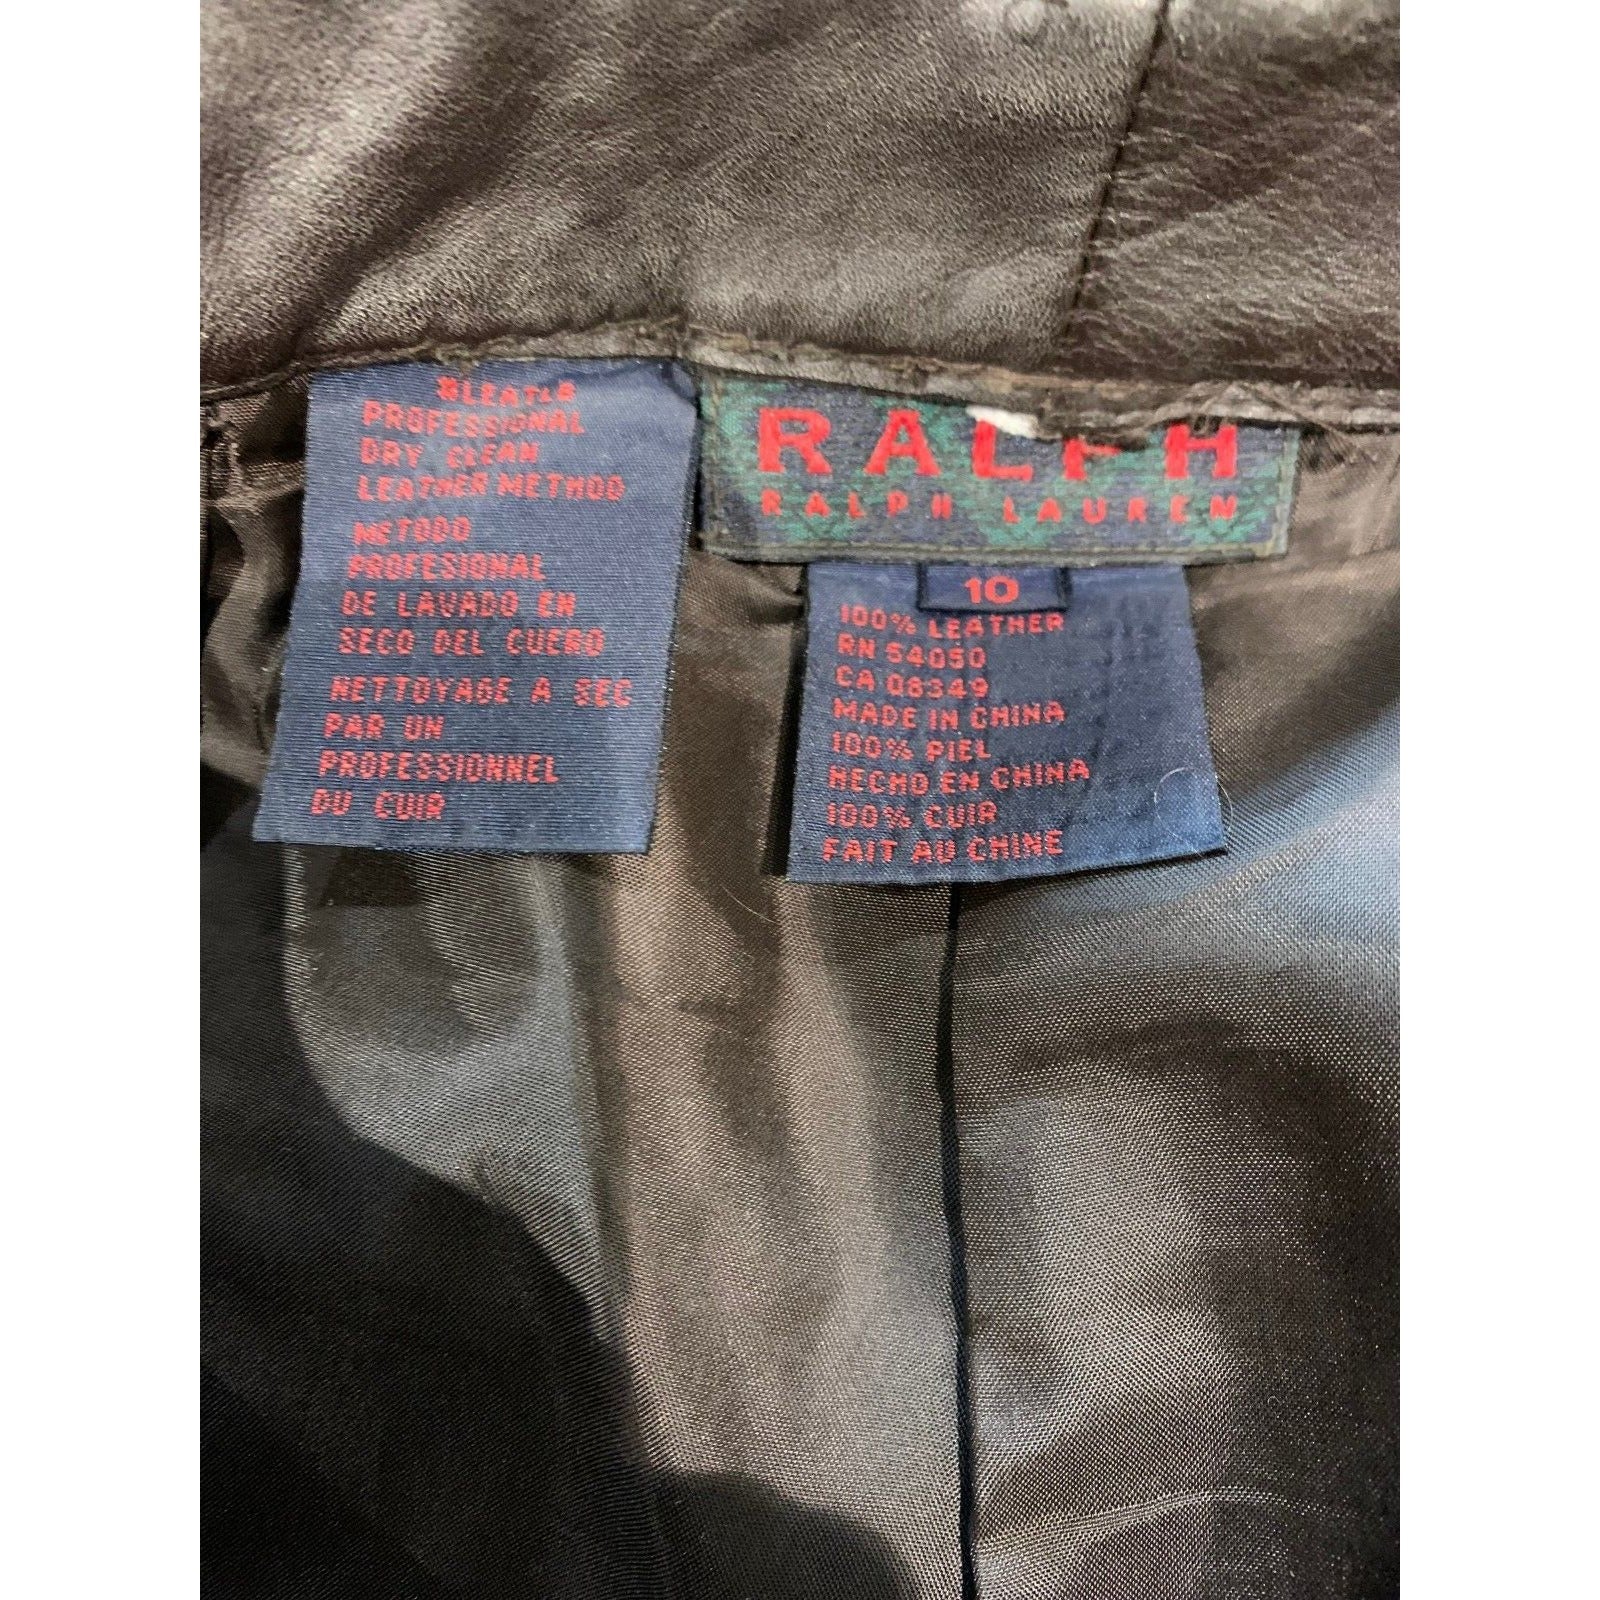 Brand Label, Fabric Info Tag And Care Instructions